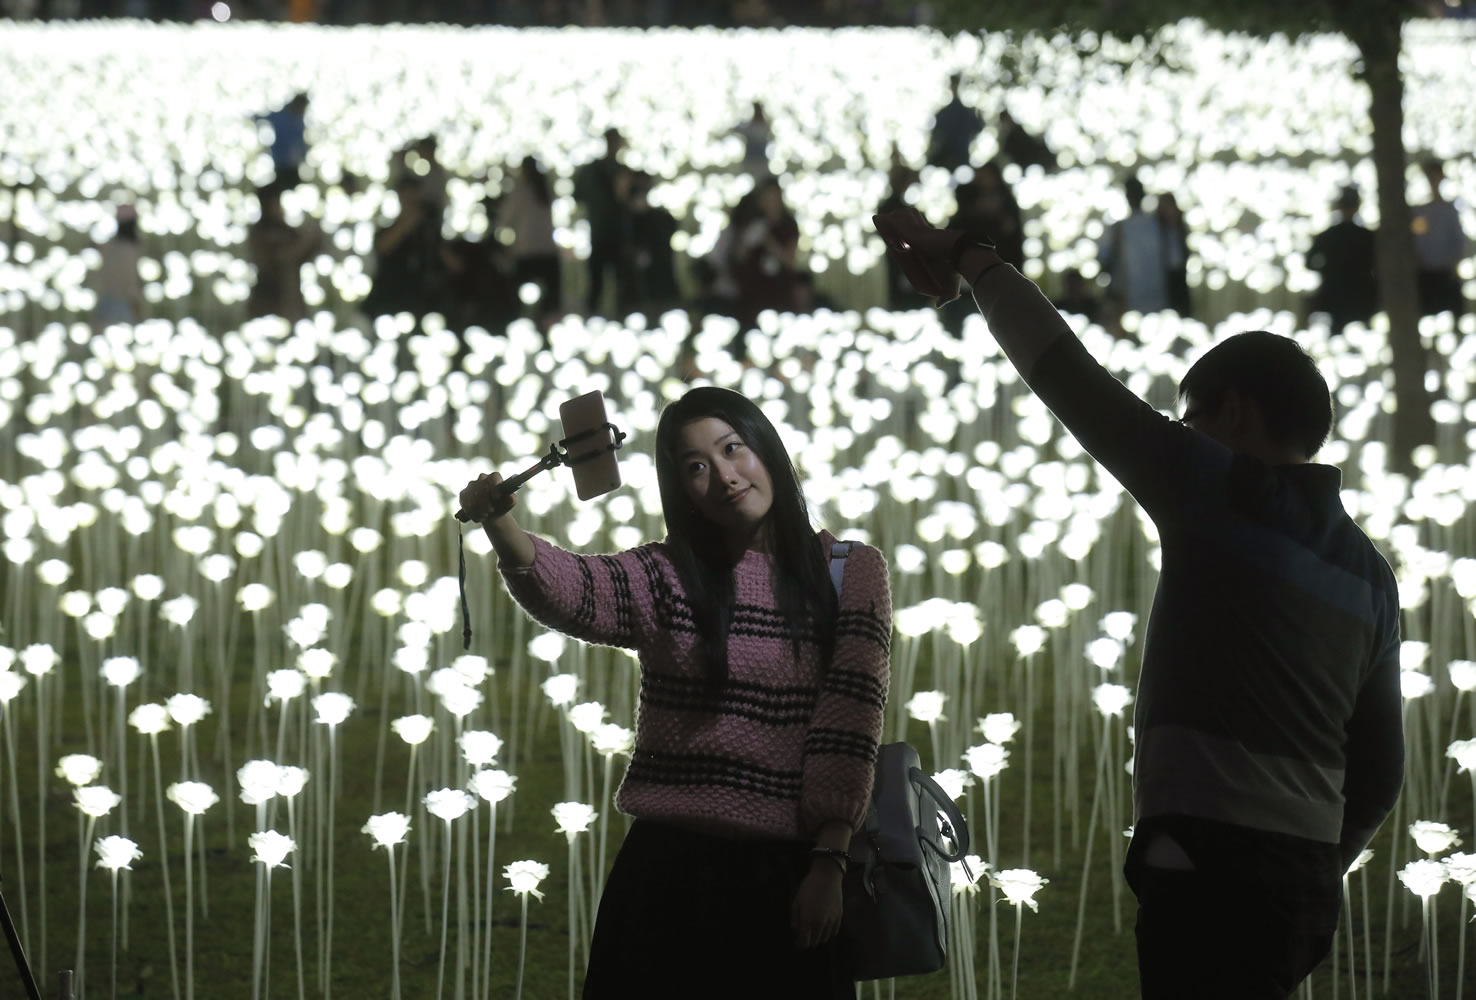 A woman takes a selfie in front of the LED lights roses at the Light Rose Garden in Hong Kong, Saturday, Feb. 13, 2016. ?Light Rose Garden&quot; is originated from South Korea, an art installation project featuring 25,000 white roses made of LED lights for Valentine?s Day.